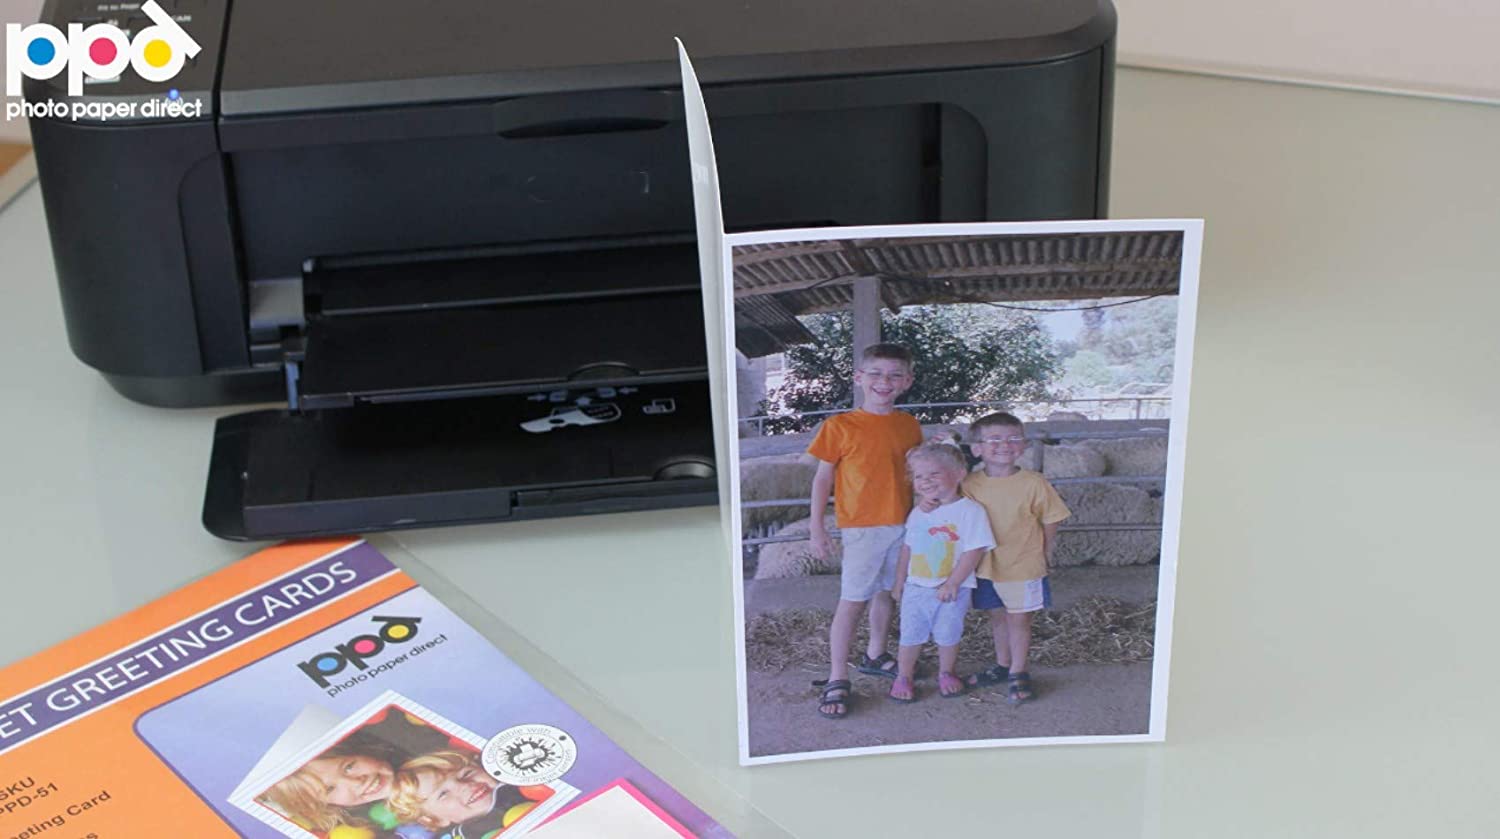 PPD Inkjet Printable Greeting Cards A5 Pre-Scored to A6 210gsm Matt Photo Quality PPD-87